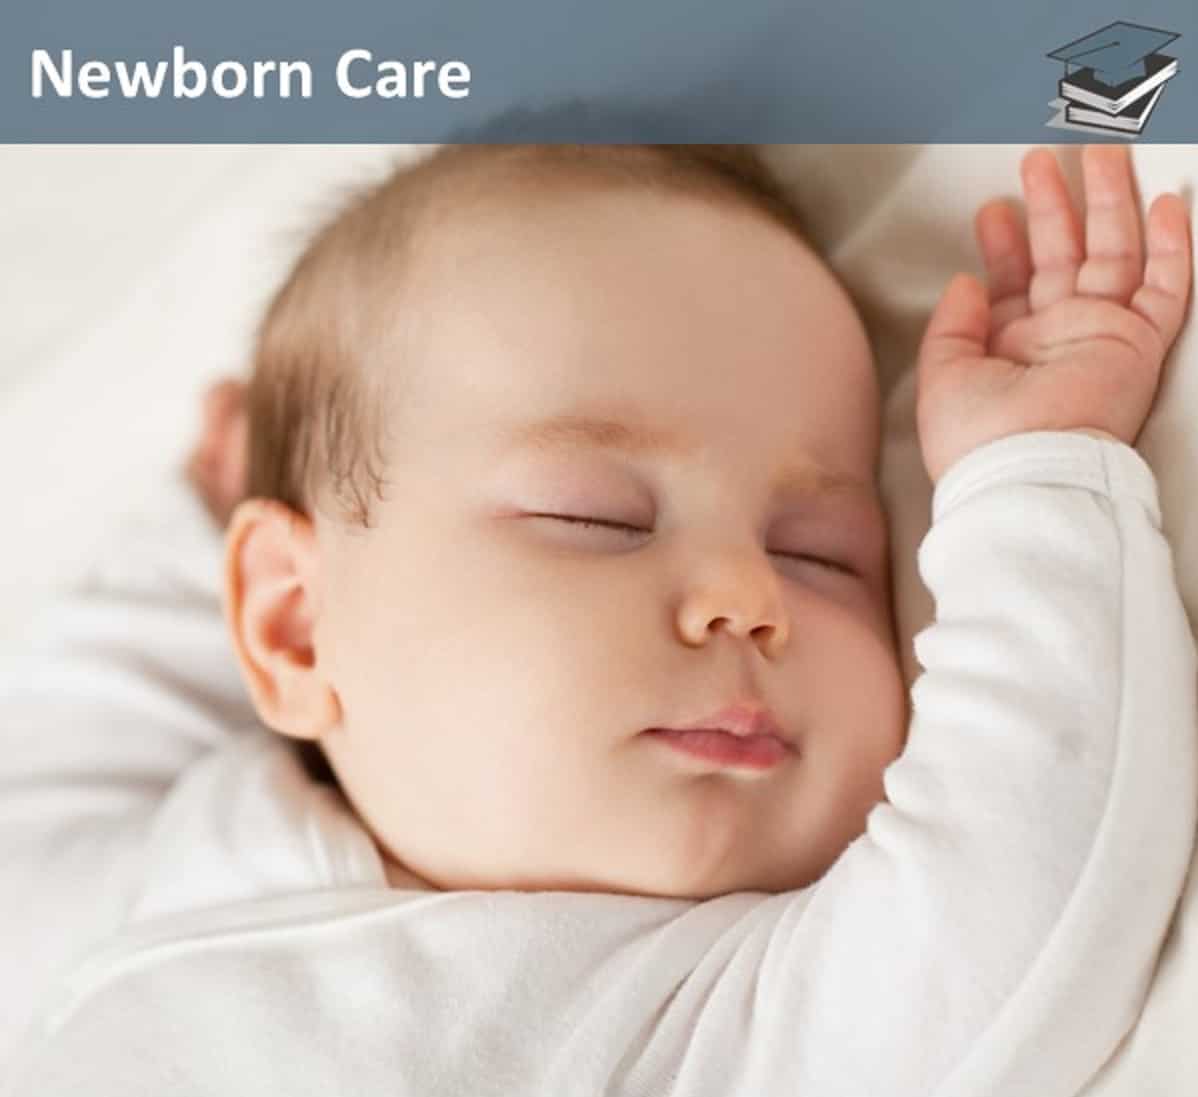 newborn care photo of an infant